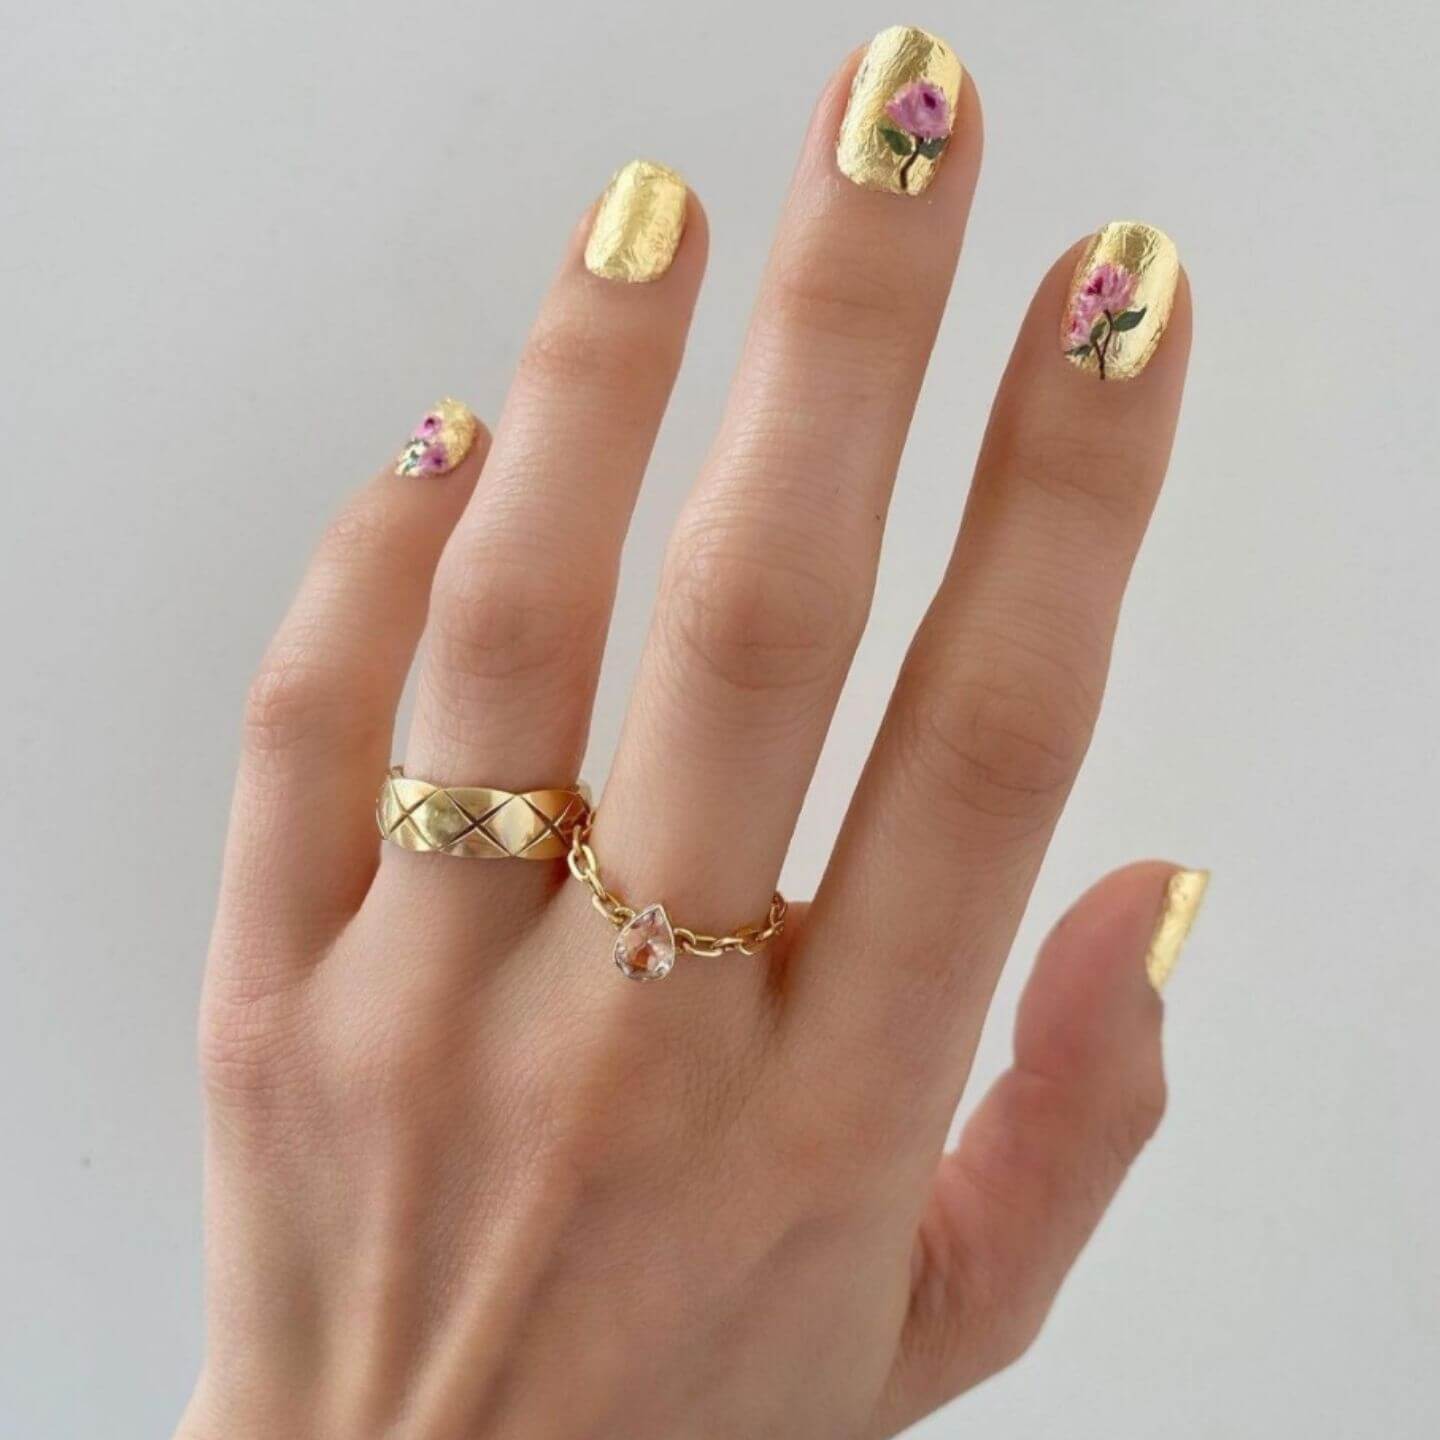 These Gorgeous Valentines Day Nails will steal your heart in 2022